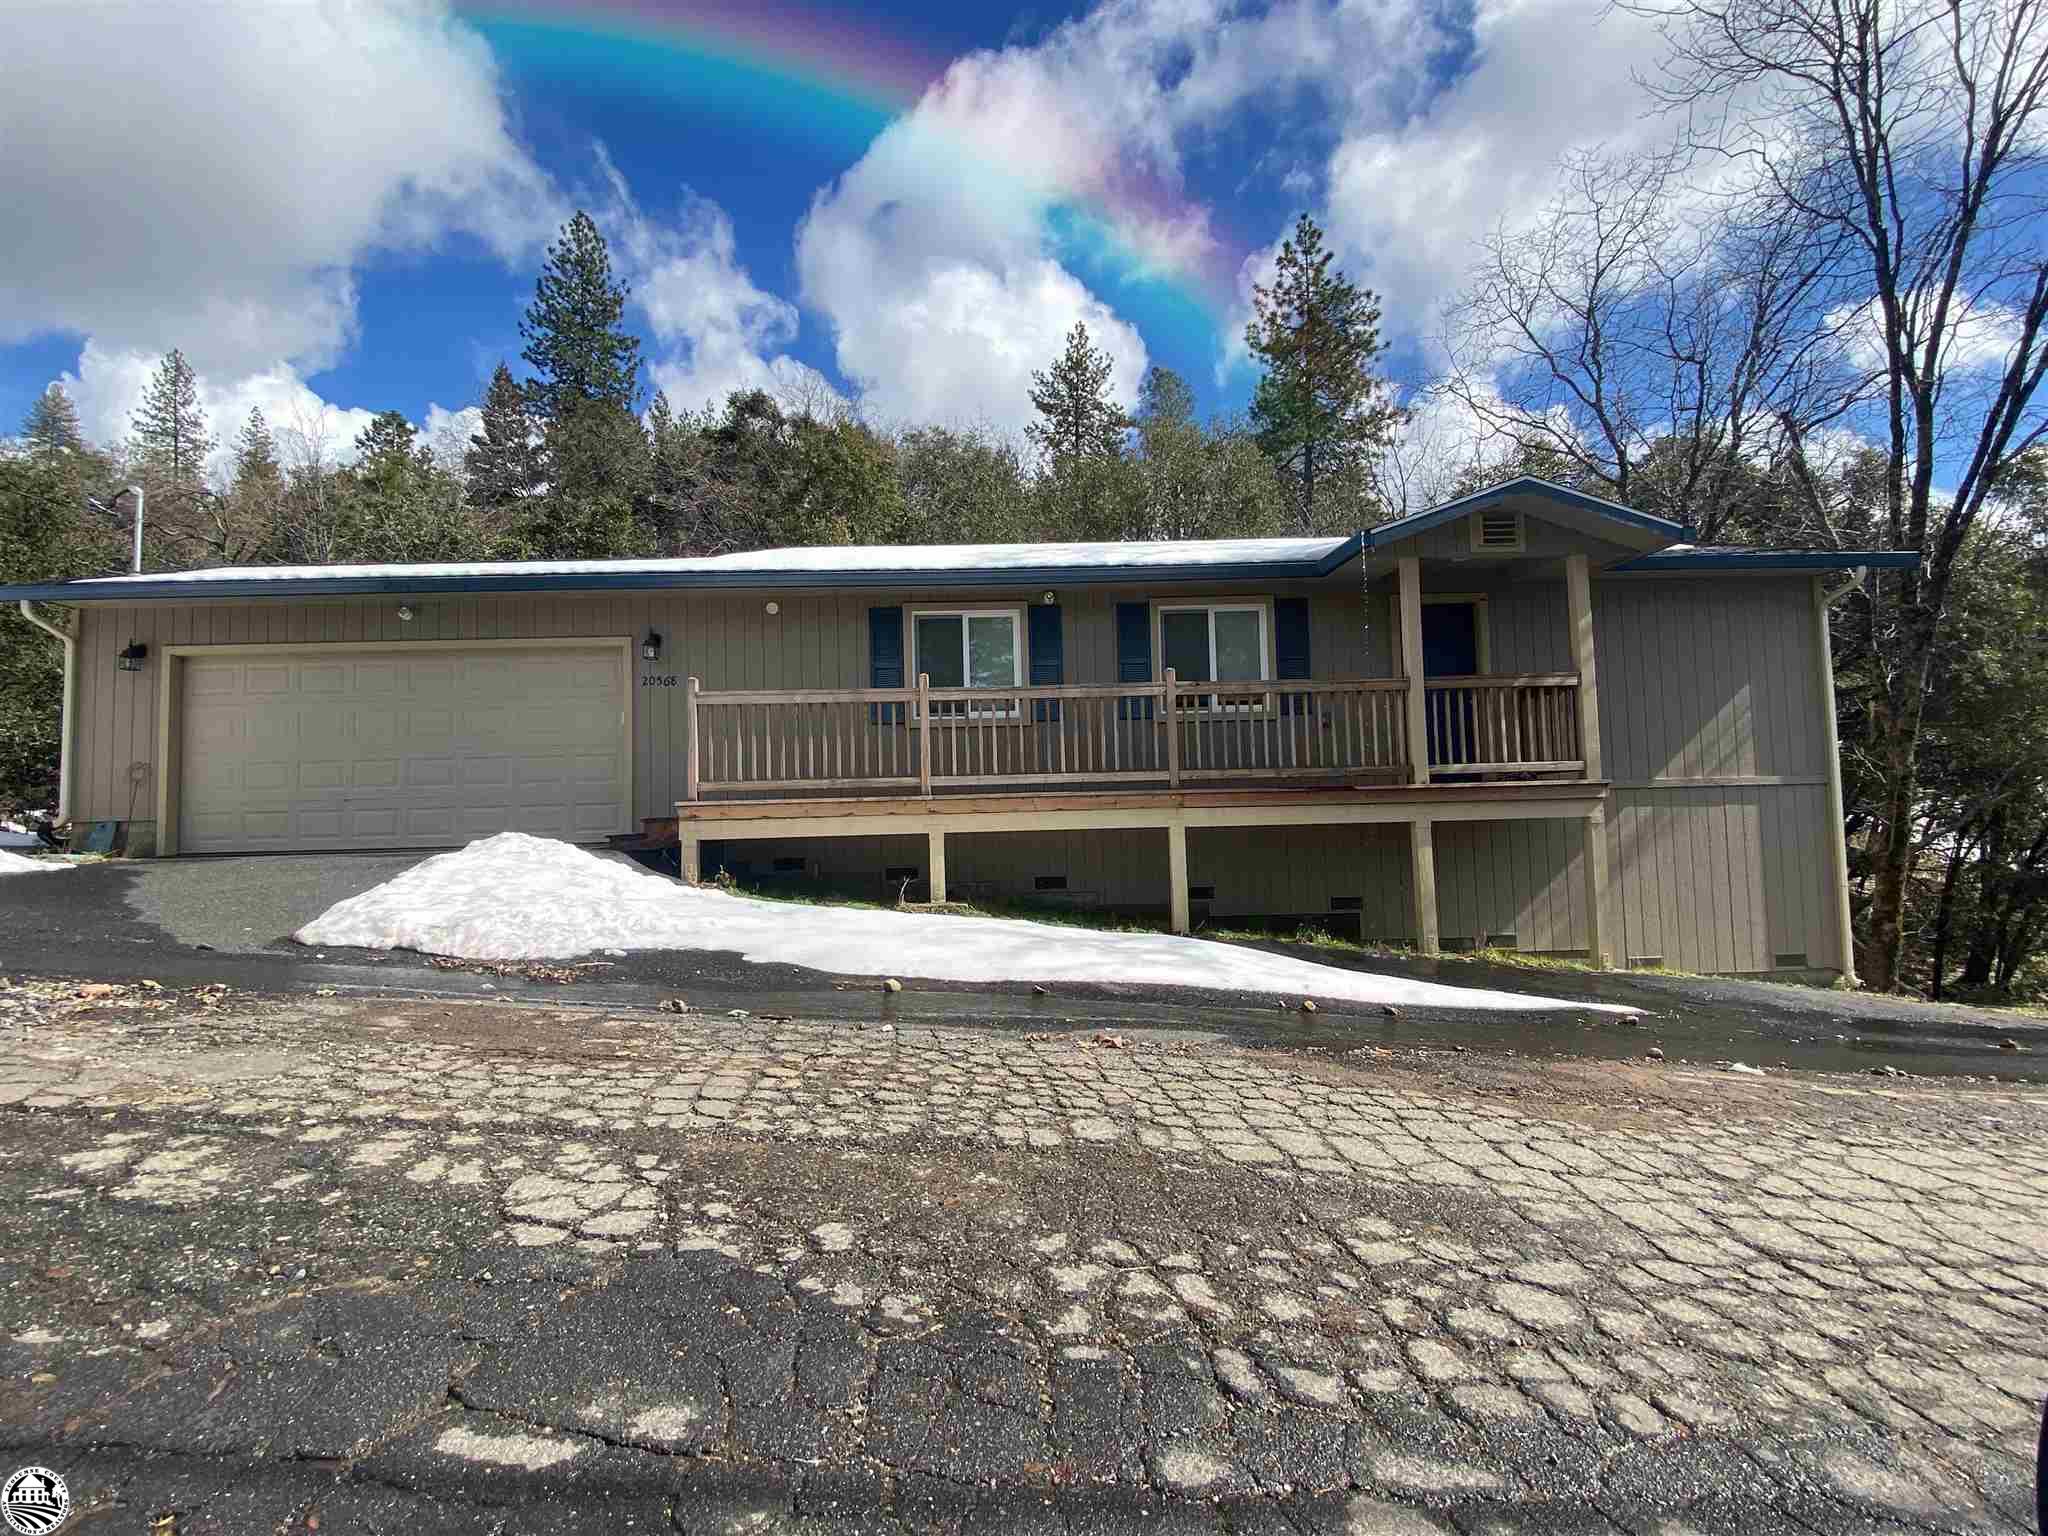 Built in 2015 - This single level, 3 bedroom 2 bath home includes a 2 car garage. Set on just over a half acre, you will enjoy the peaceful mountain setting on the front or back deck. This home comes equipped with everything you will need; central heat and air, dual pane windows, a wood stove, modern kitchen featuring granite counters, stainless steel appliances, including a 5 burner gas stove and refrigerator.   Willow Springs is a great Neighborhood with amenities such as tennis courts, a playground, baseball diamond, 2 ponds and a clubhouse - all for a small HOA fee of $49.50 per quarter. Willow Springs is conveniently located just minutes from Hwy 108, and is right at the base of all the recreational activities such as Dodge Ridge Ski Resort, Pinecrest Lake, Yosemite National Park and more. Make this your permanent home, investment or second home today.